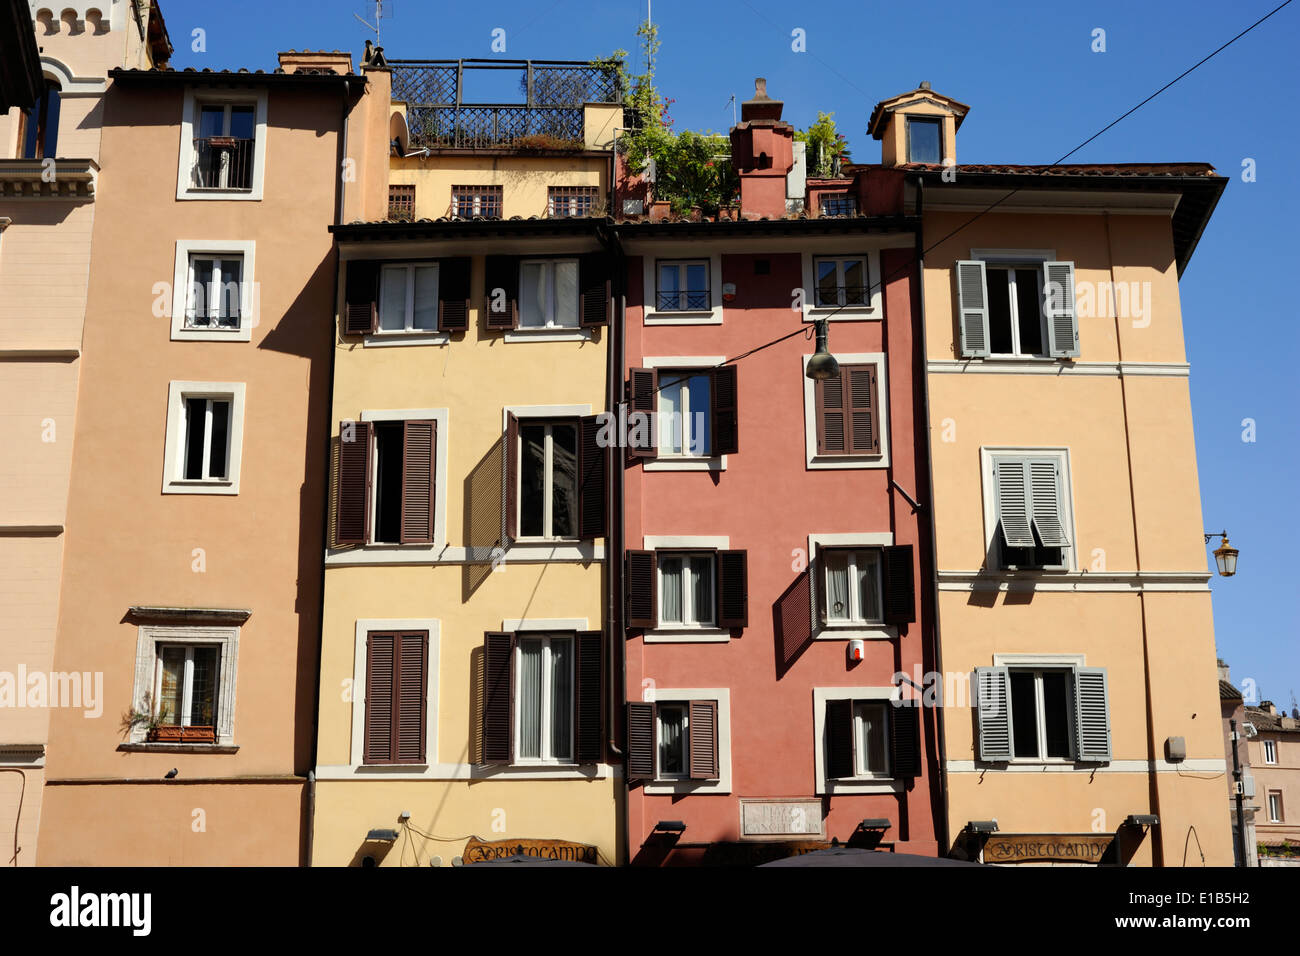 italy, rome, colourful buildings Stock Photo